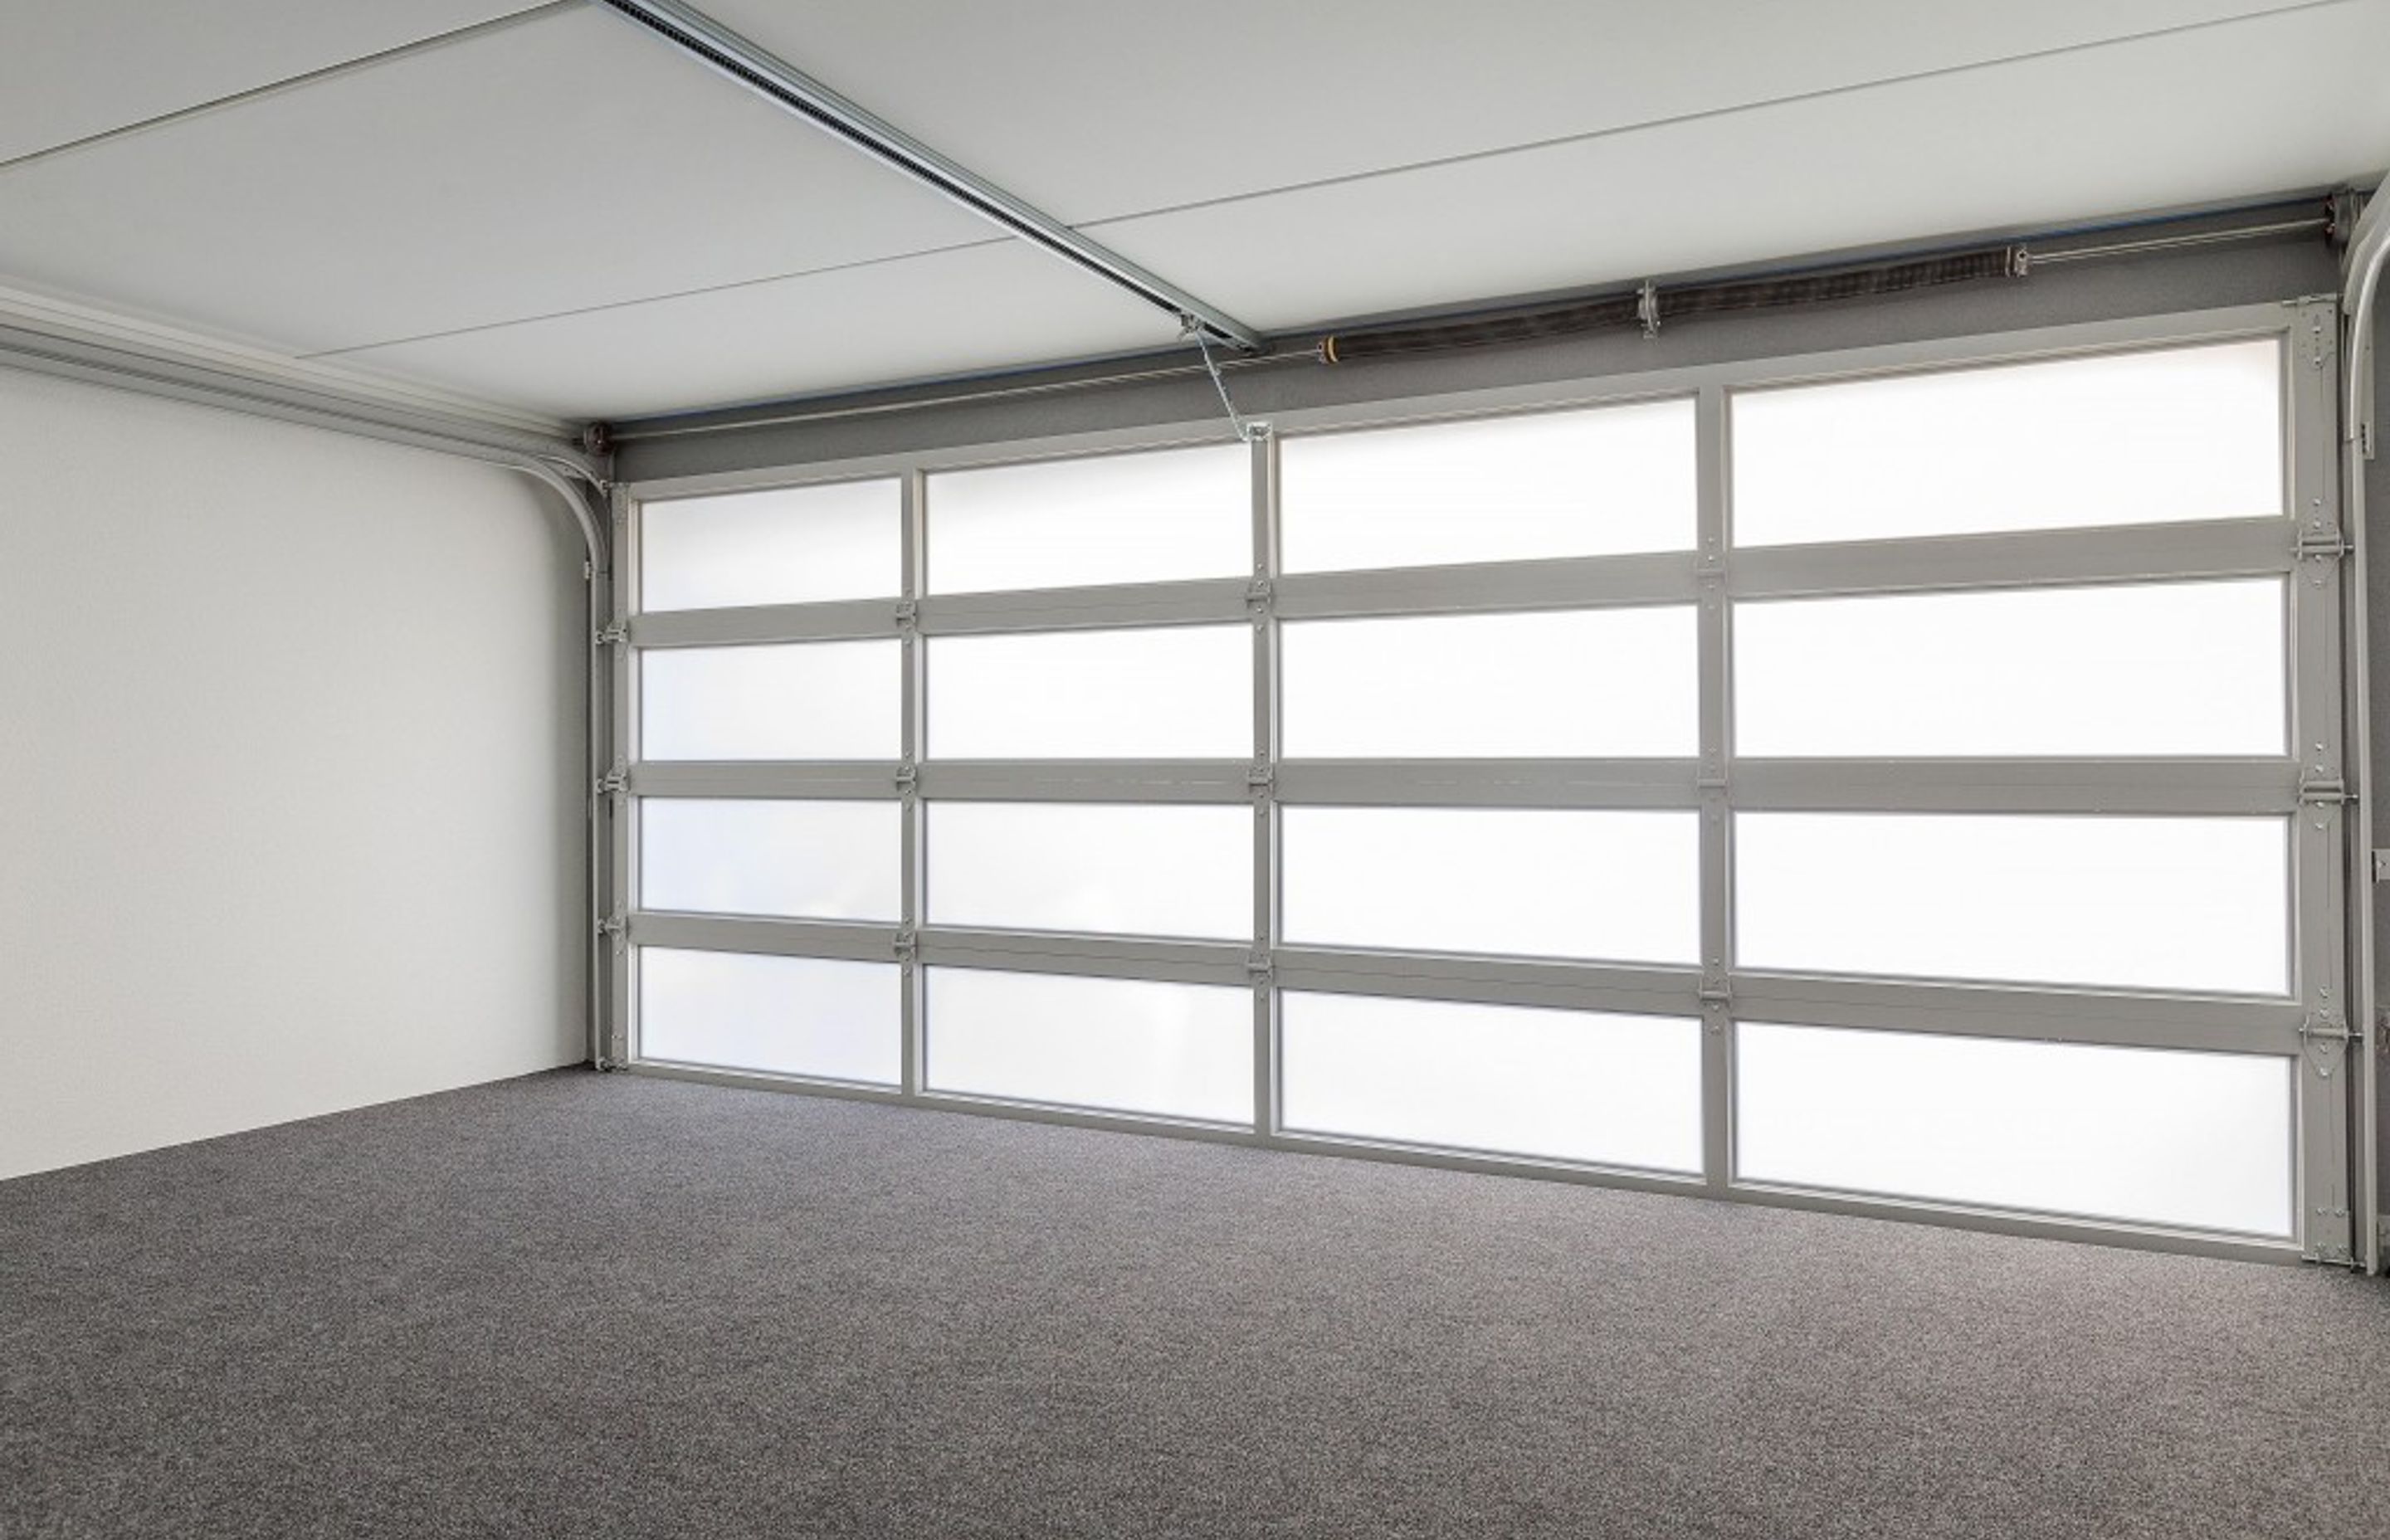 Plexiglass garage doors not only look smart, they allow light into your garage and can be lit to dramatic effect